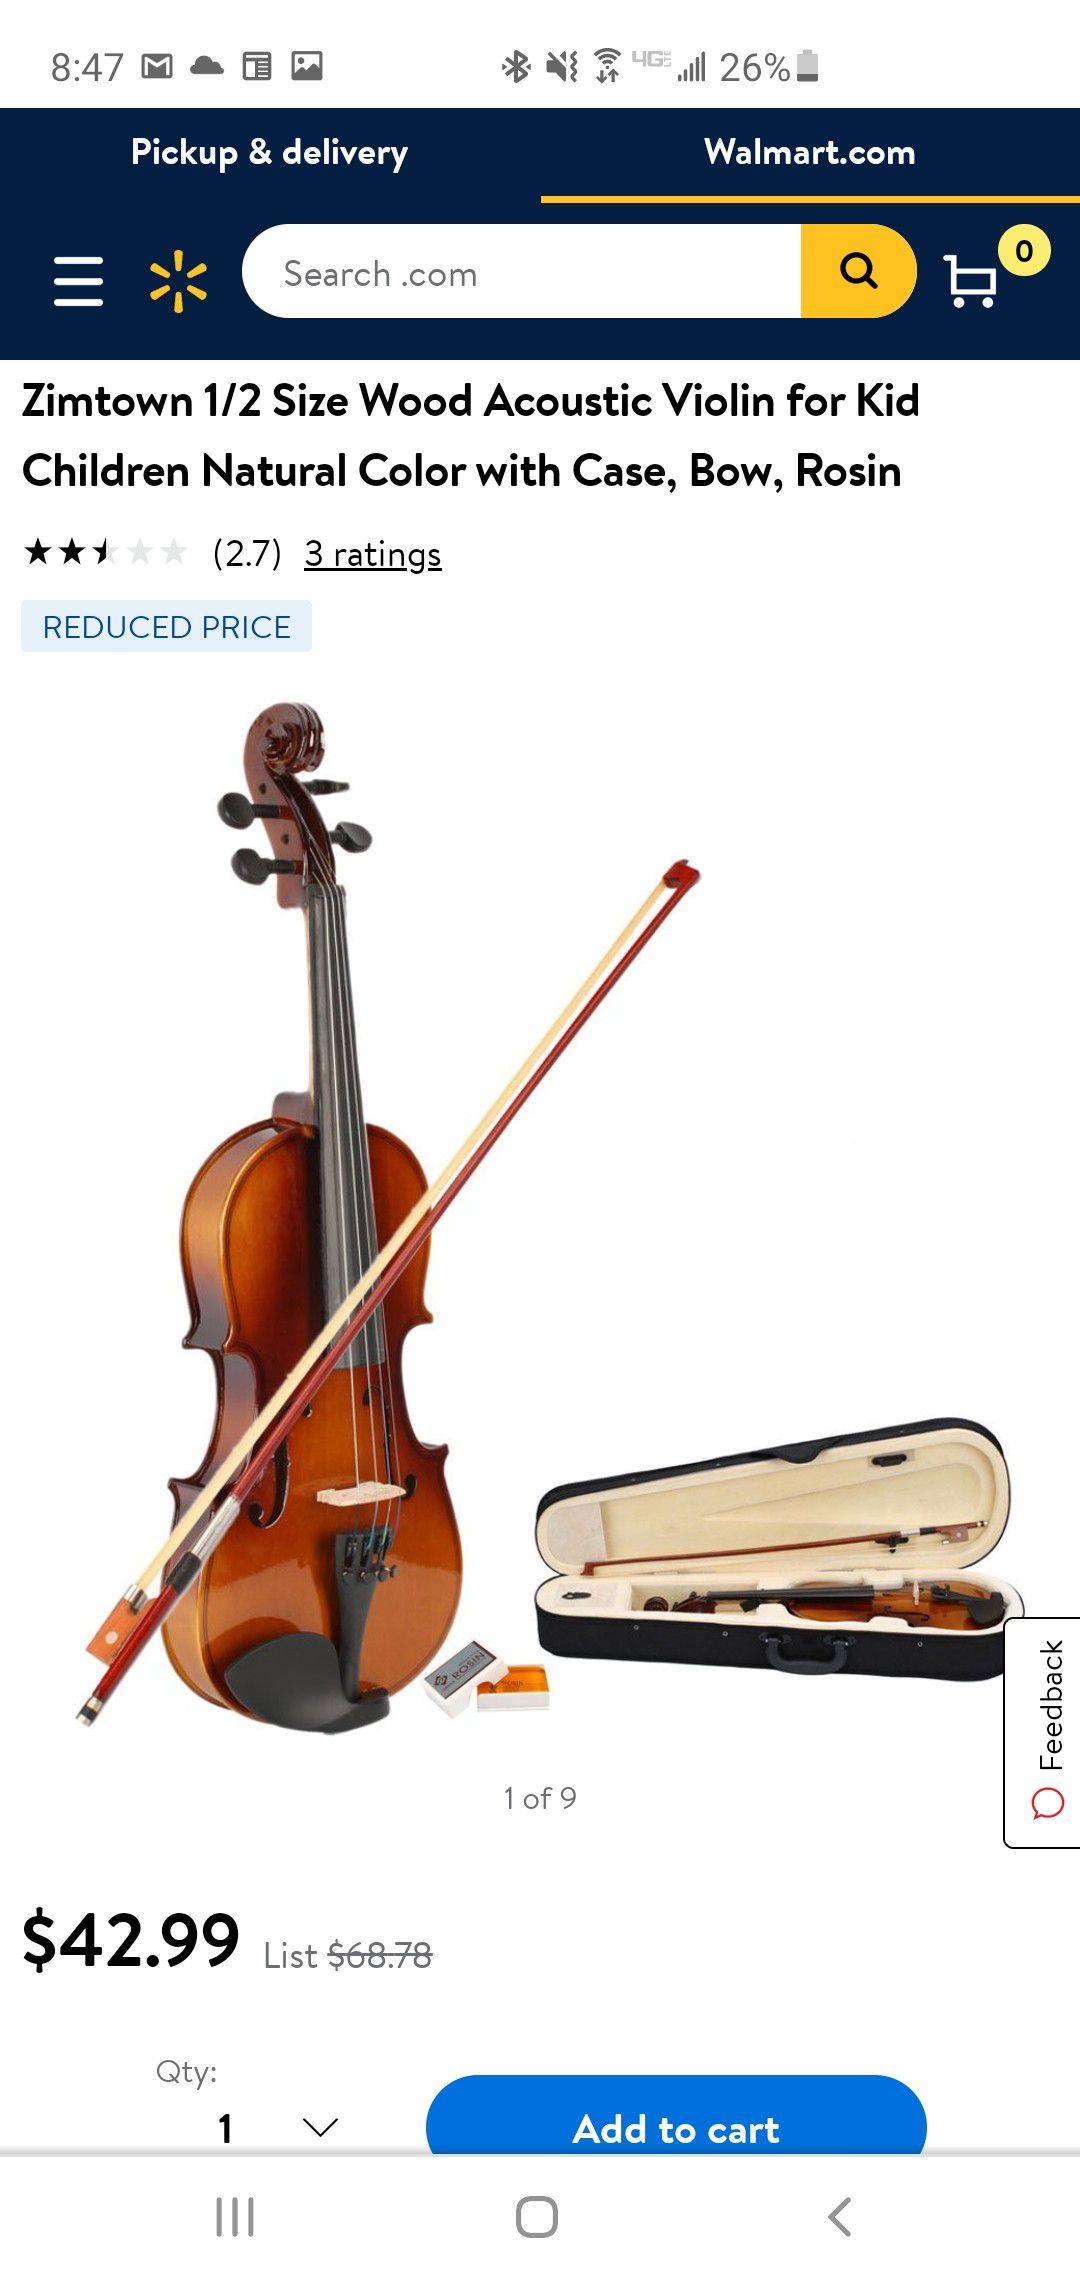 Zimtown 1/2 Size Wood Acoustic Violin for Kid Children Natural Color with Case, Bow, Rosin